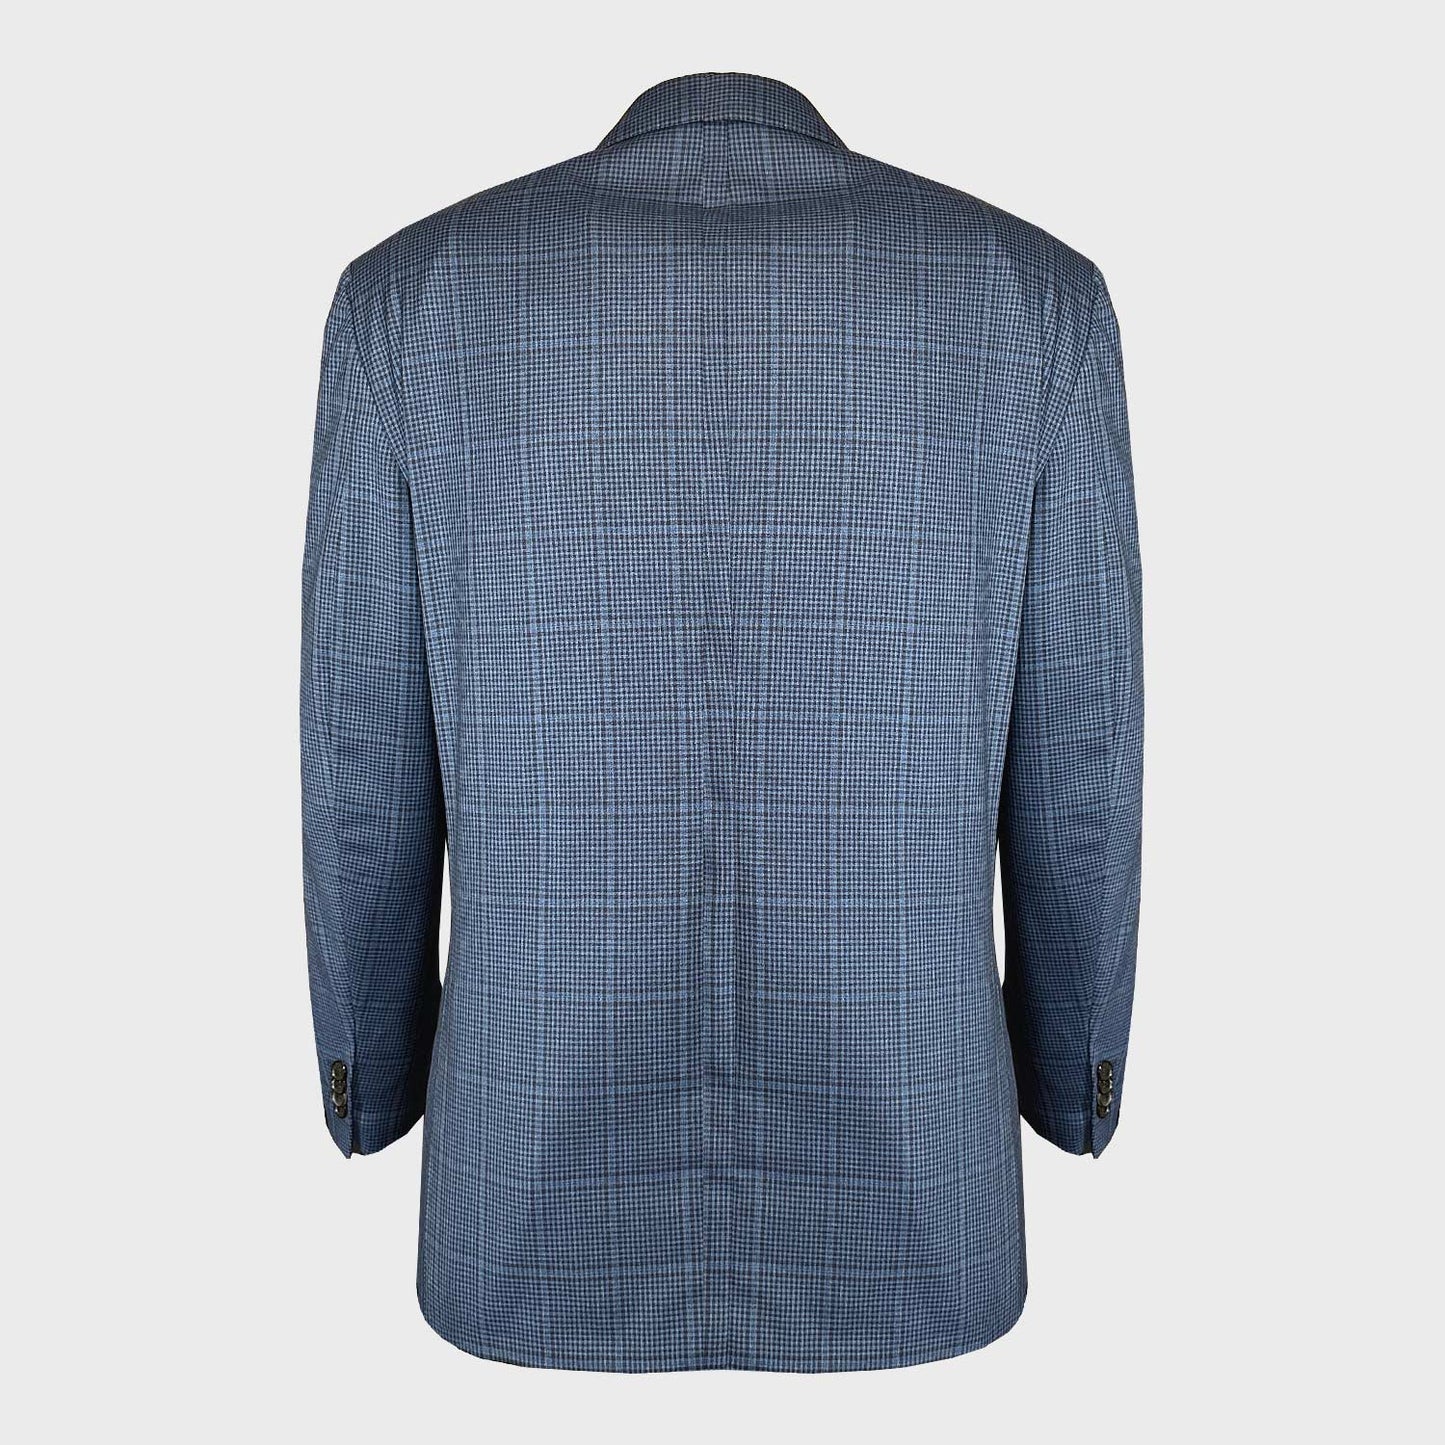 Exclusive Caruso double-breasted wool jacket, a timeless piece available only at Wools Boutique Uomo. This sartorial jacket combines classic elegance with a touch of vintage charm with the sky blue opaque windowpane pattern adds a refined flair.